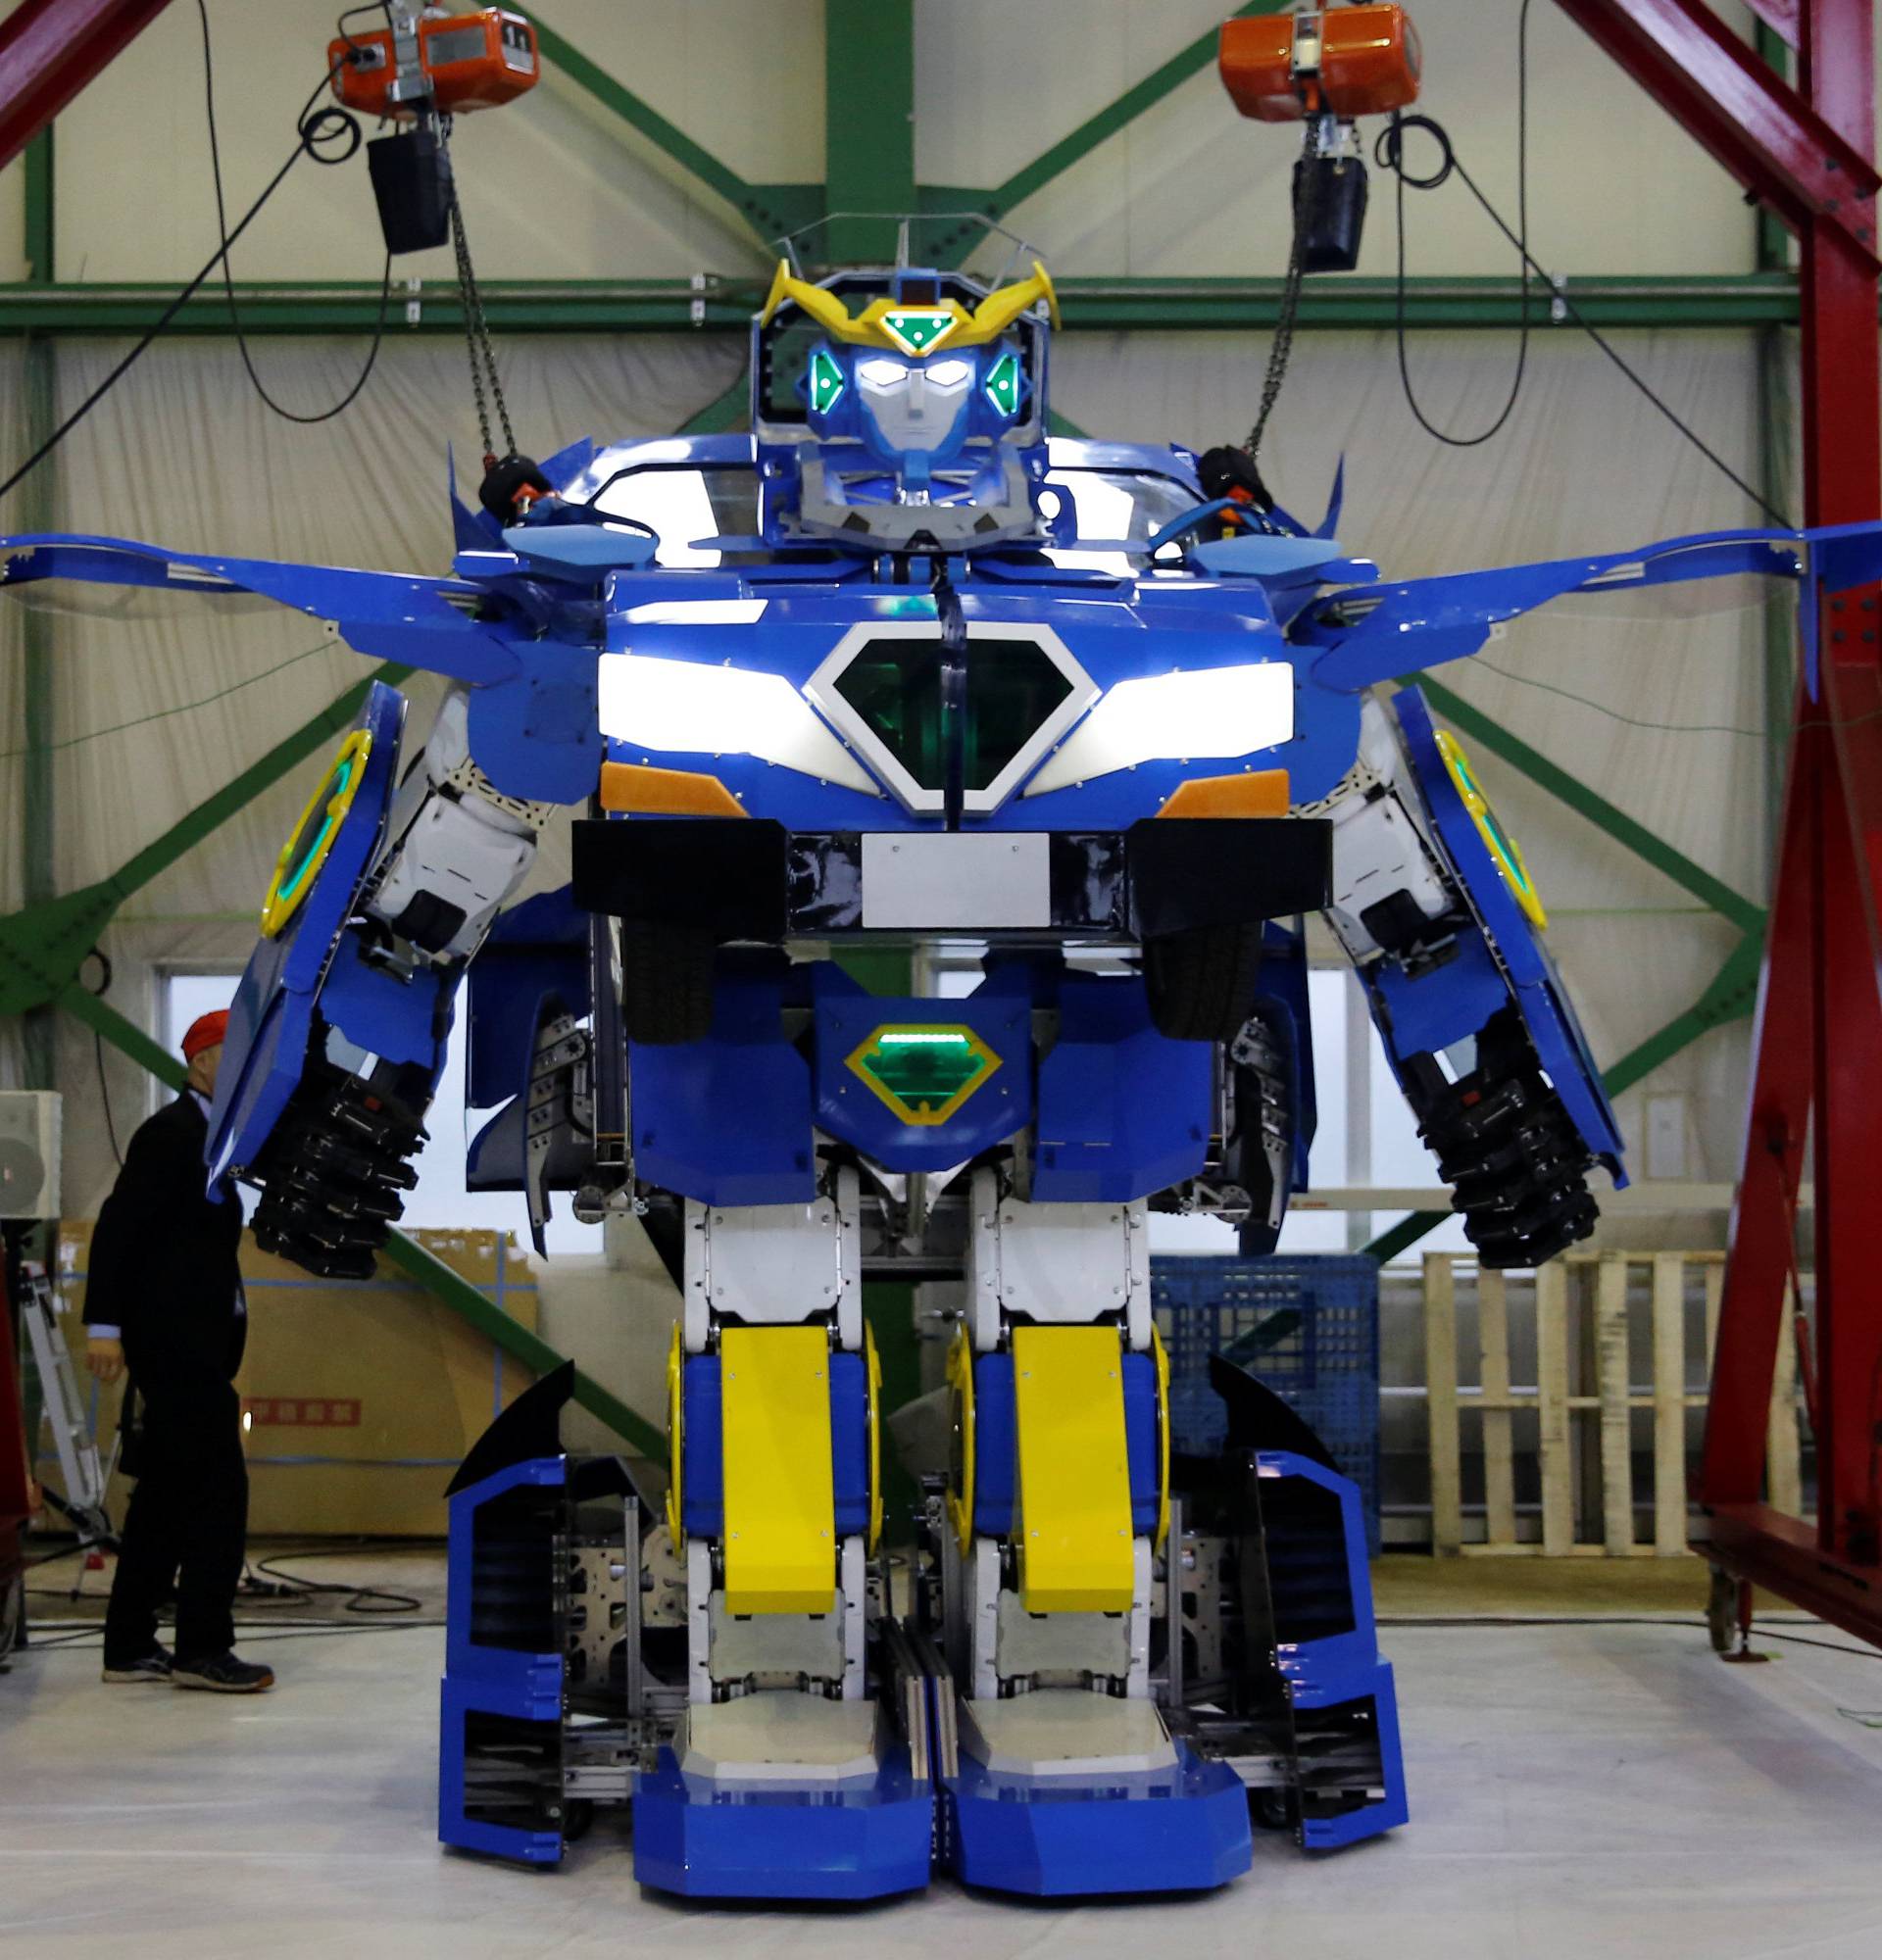 New transforming robot called "J-deite RIDE" that transforms itself into a passenger vehicle, developed by Brave Robotics Inc, Asratec Corp and Sansei Technologies Inc, demonstrates during its unveiling at a factory near Tokyo